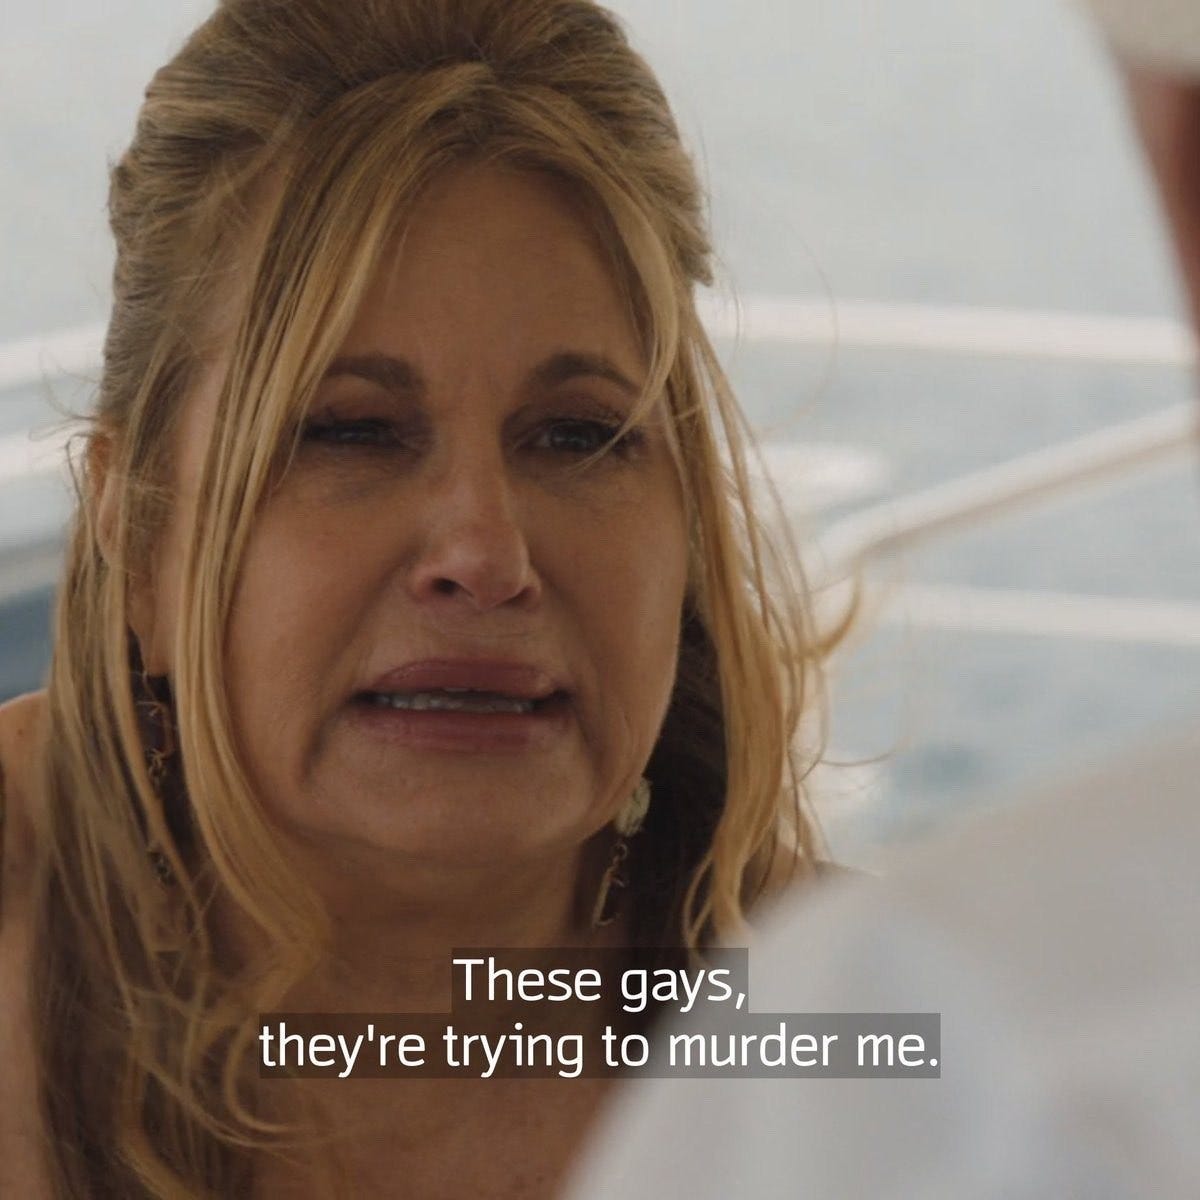 jennifer coolidge in "the white lotus" saying "these gays, they're trying to murder me."